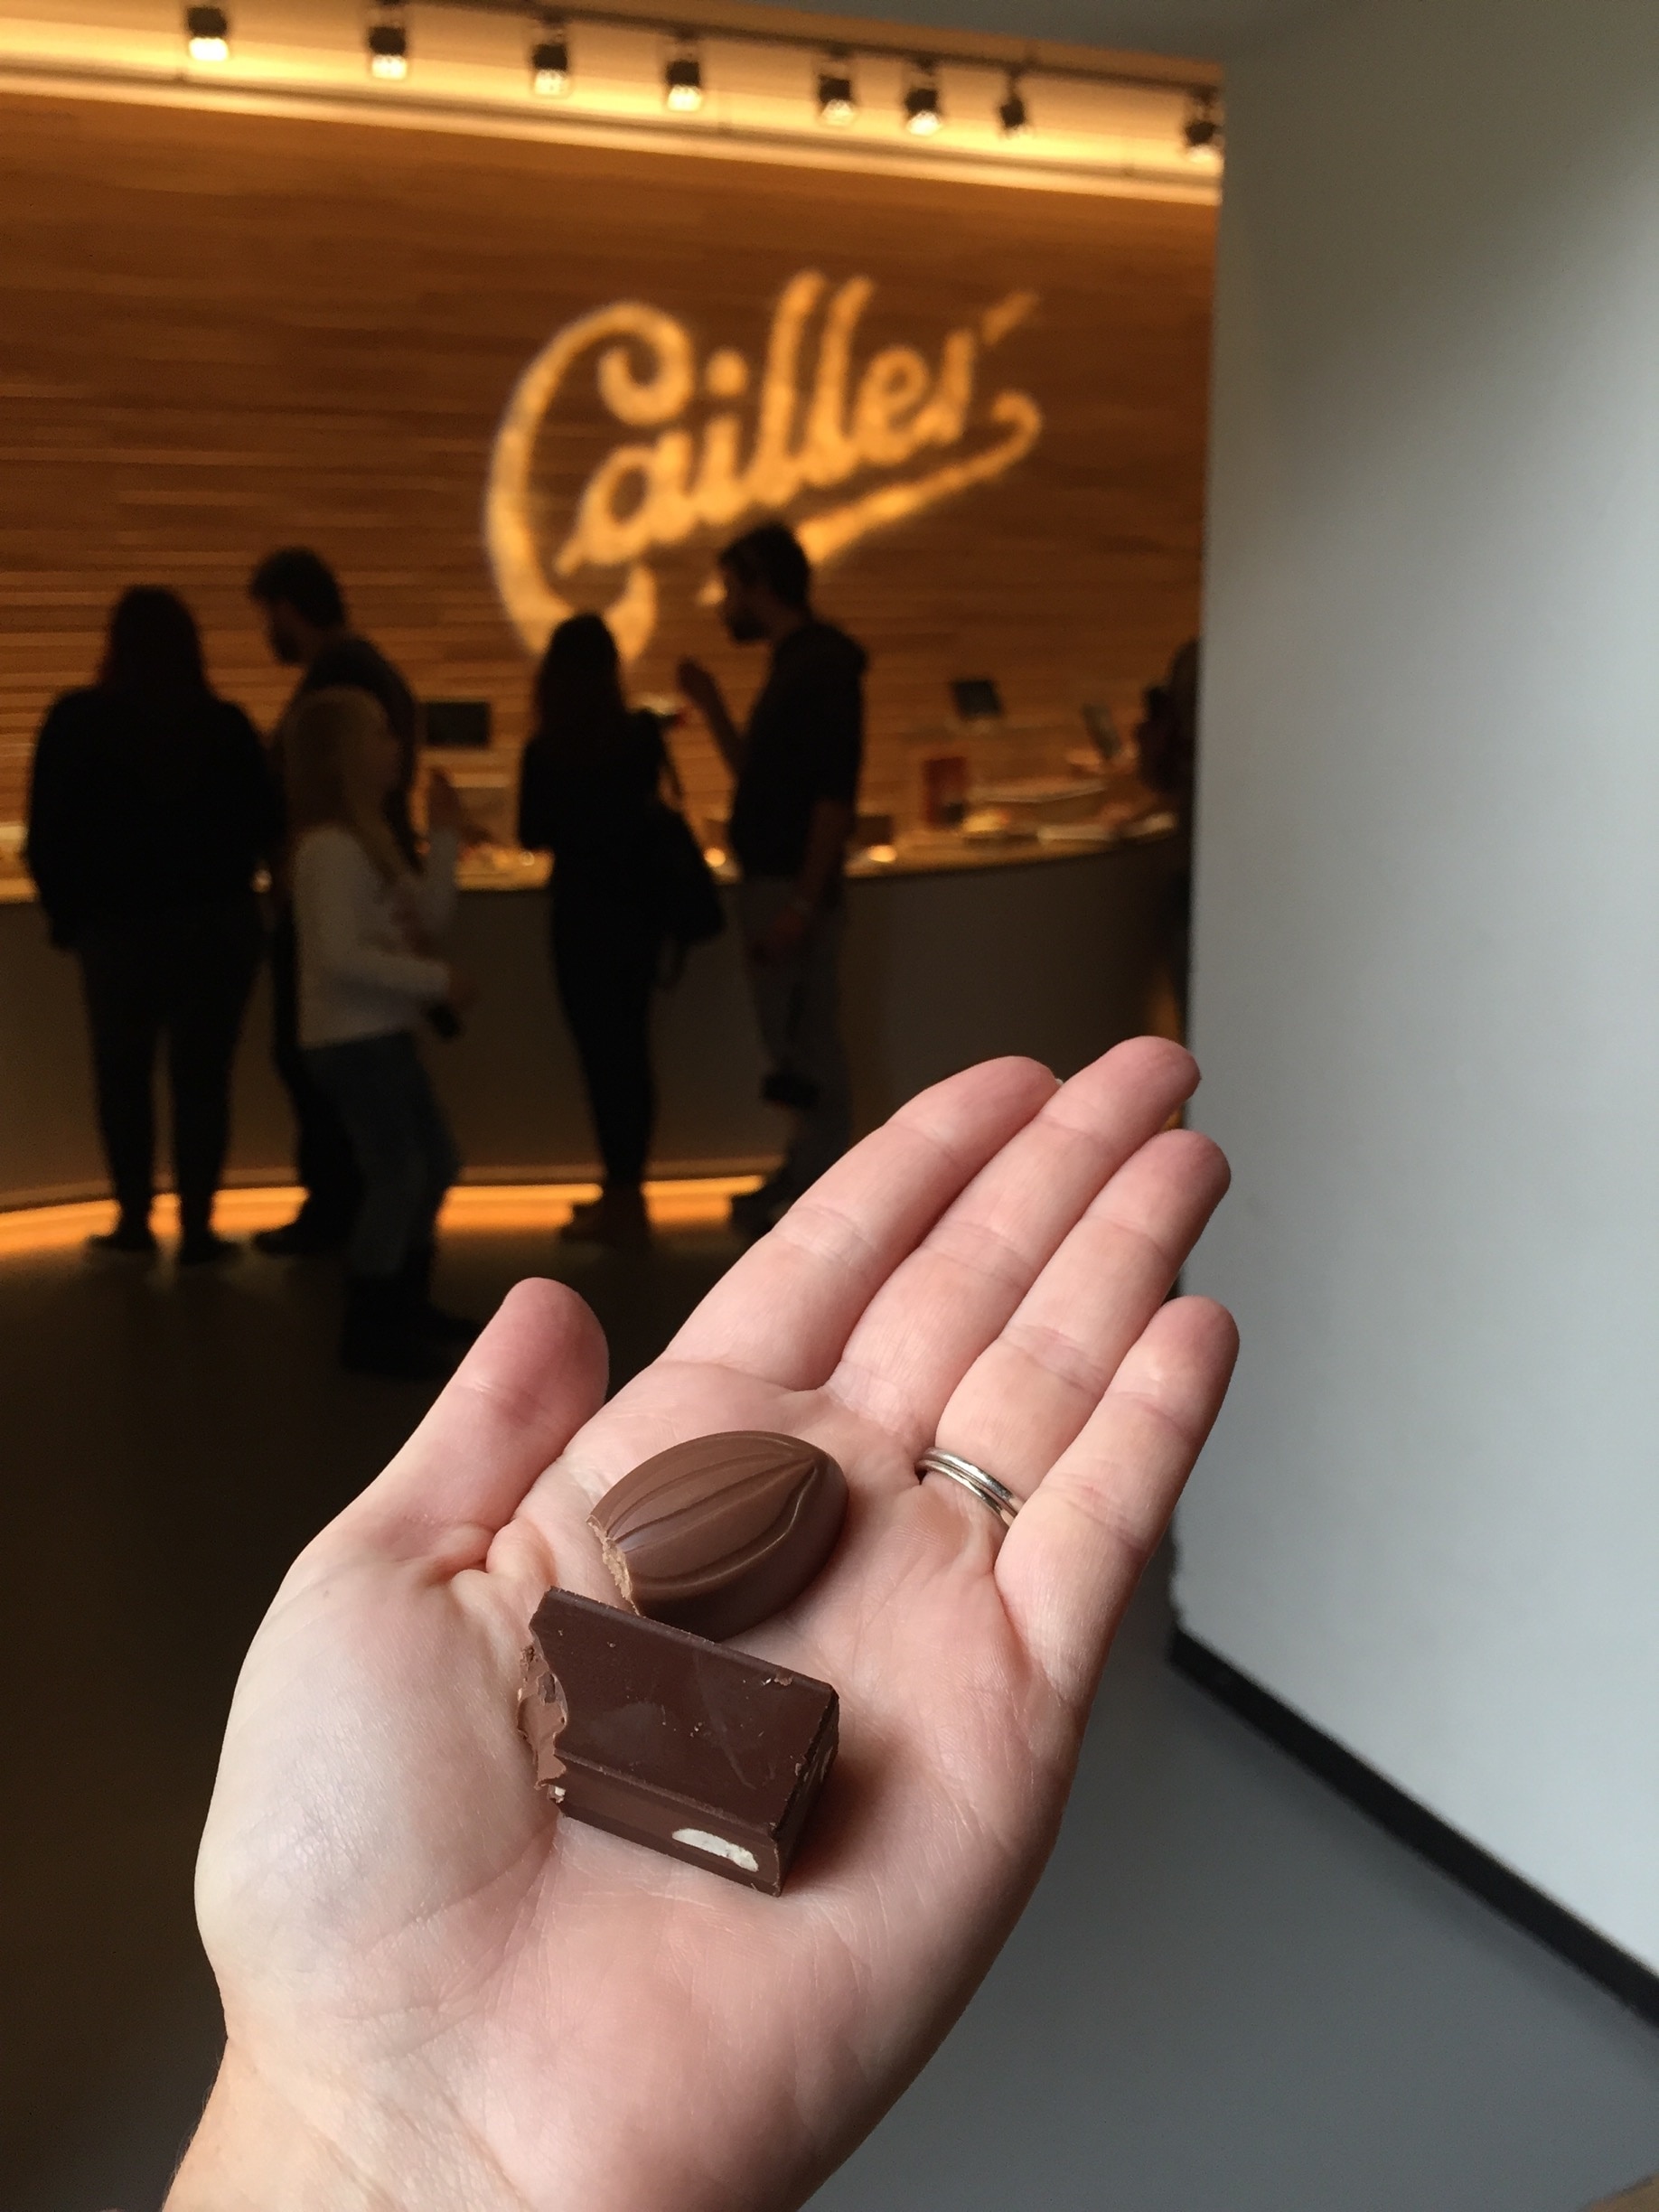 The #chocolate #tour at Maison #Callier is absolutely phenomenal - and the samples at the ends are a tasty reward! #FoodieFinds 